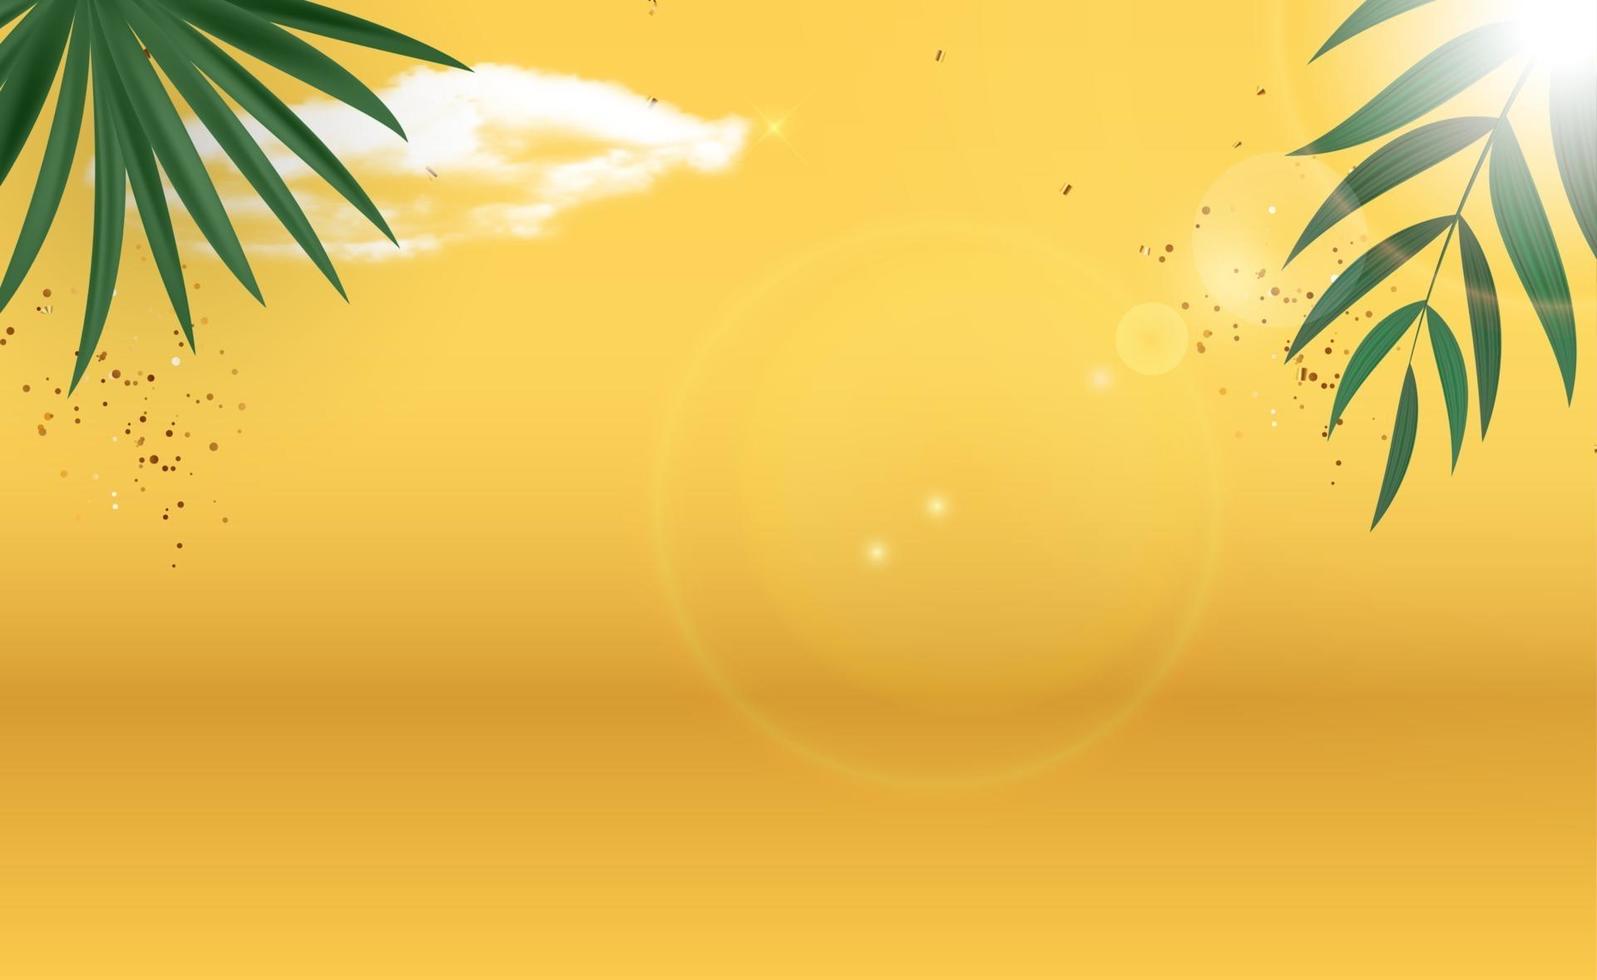 Abstract Palm Leaves Yellow Summer Background. Vector Illustration